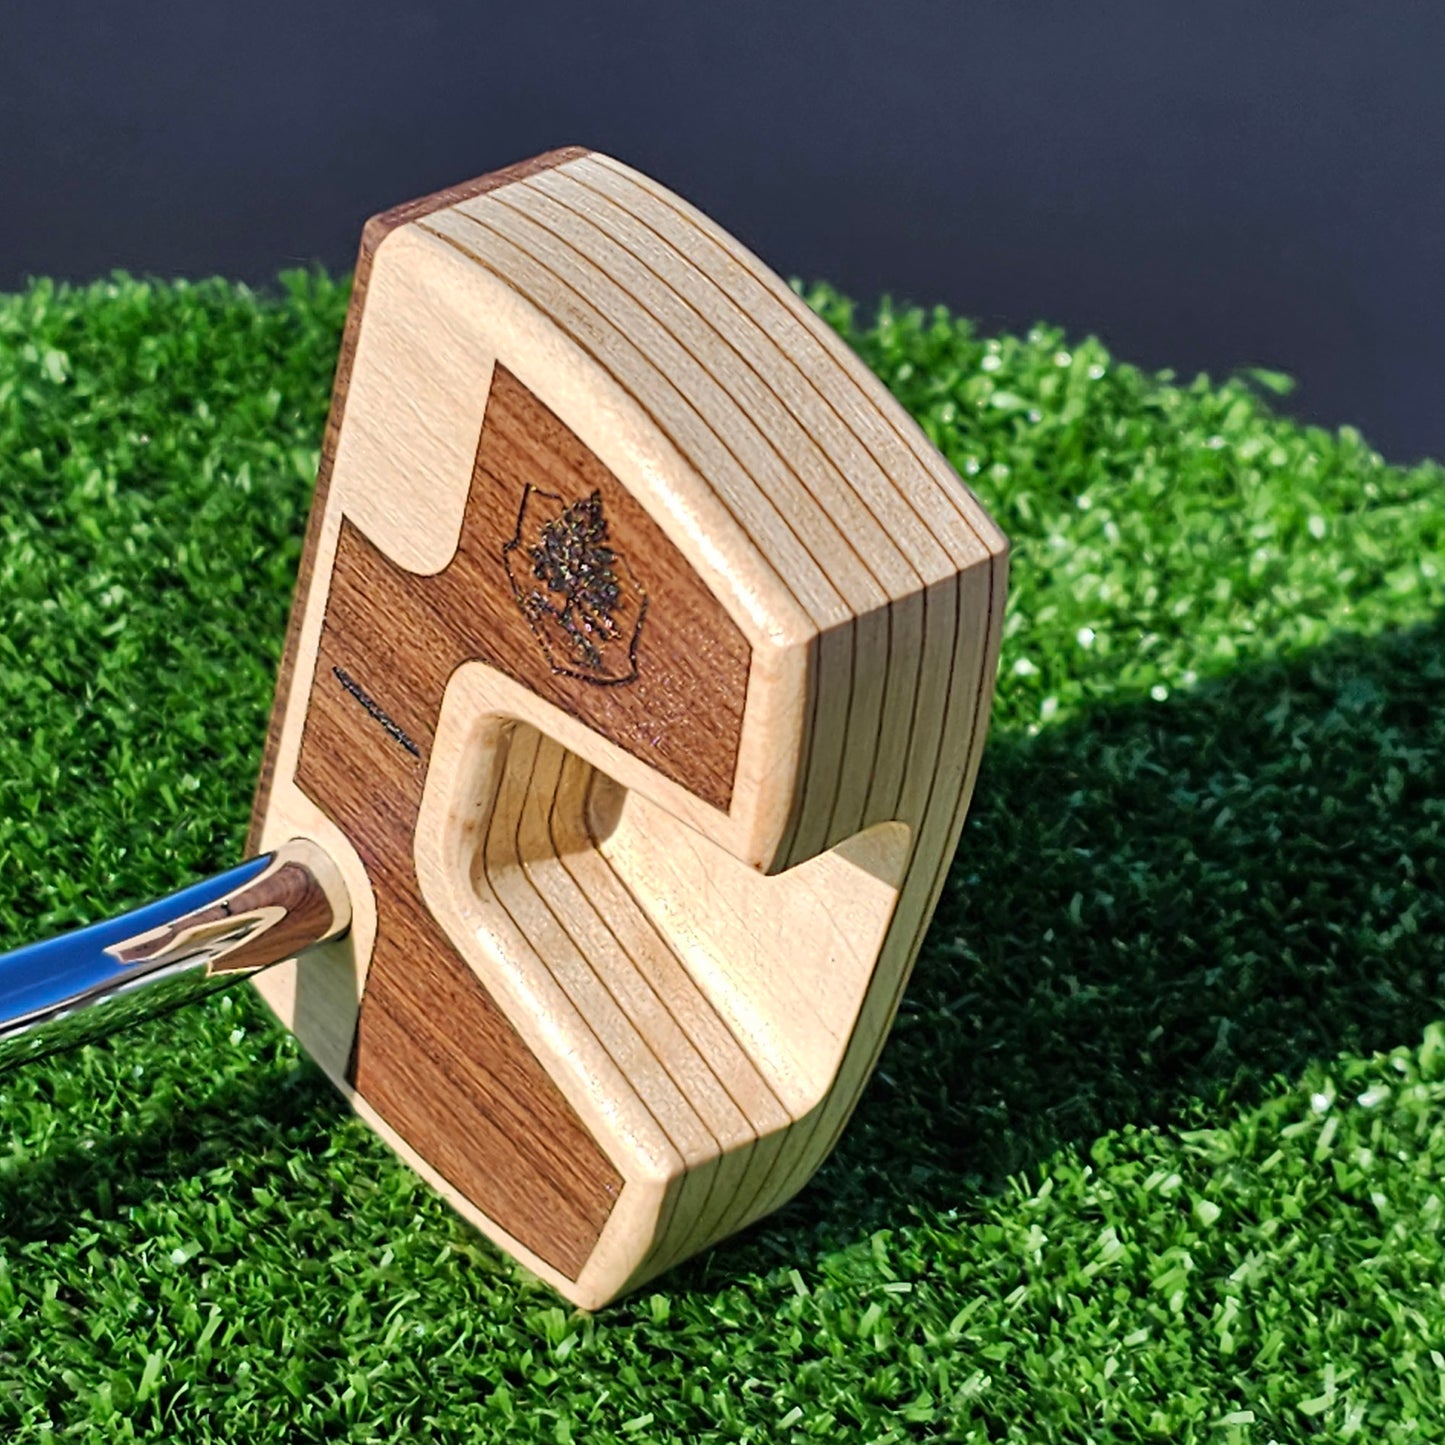 Bolivian Rosewood and Maple body Woodrich Regal wood putter